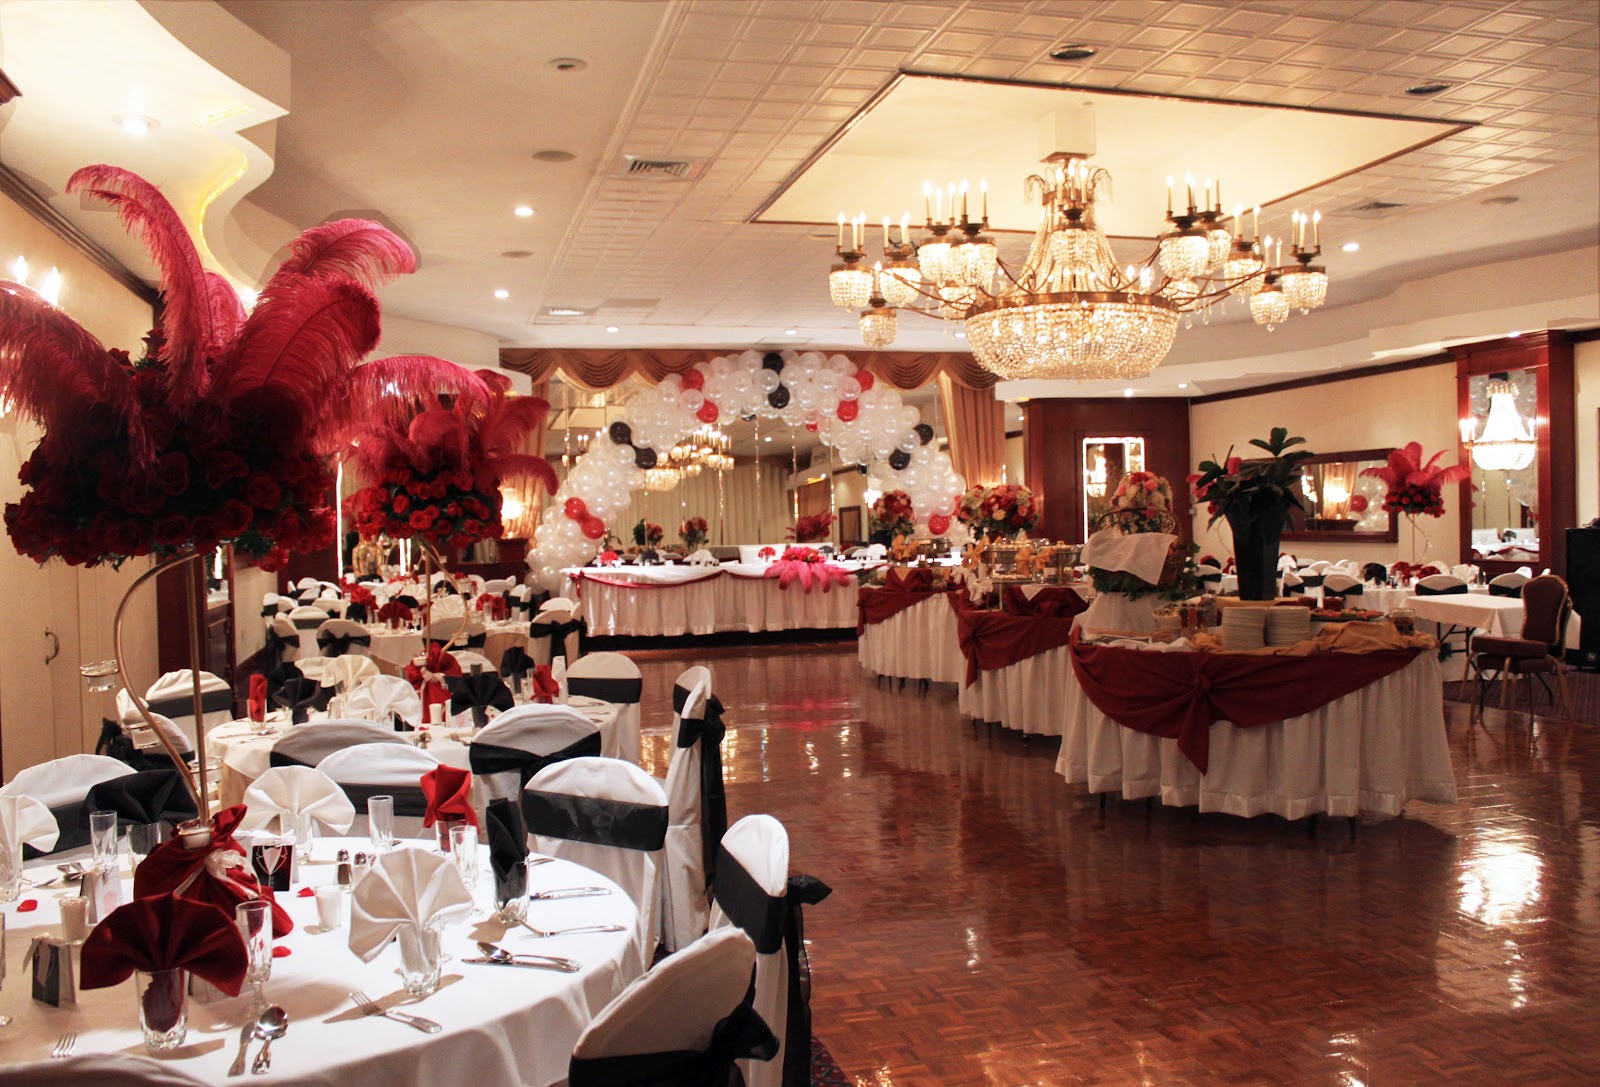 130 New baby shower party rentals brooklyn 605   rock event space available for baby showers in brooklyn new york.html 